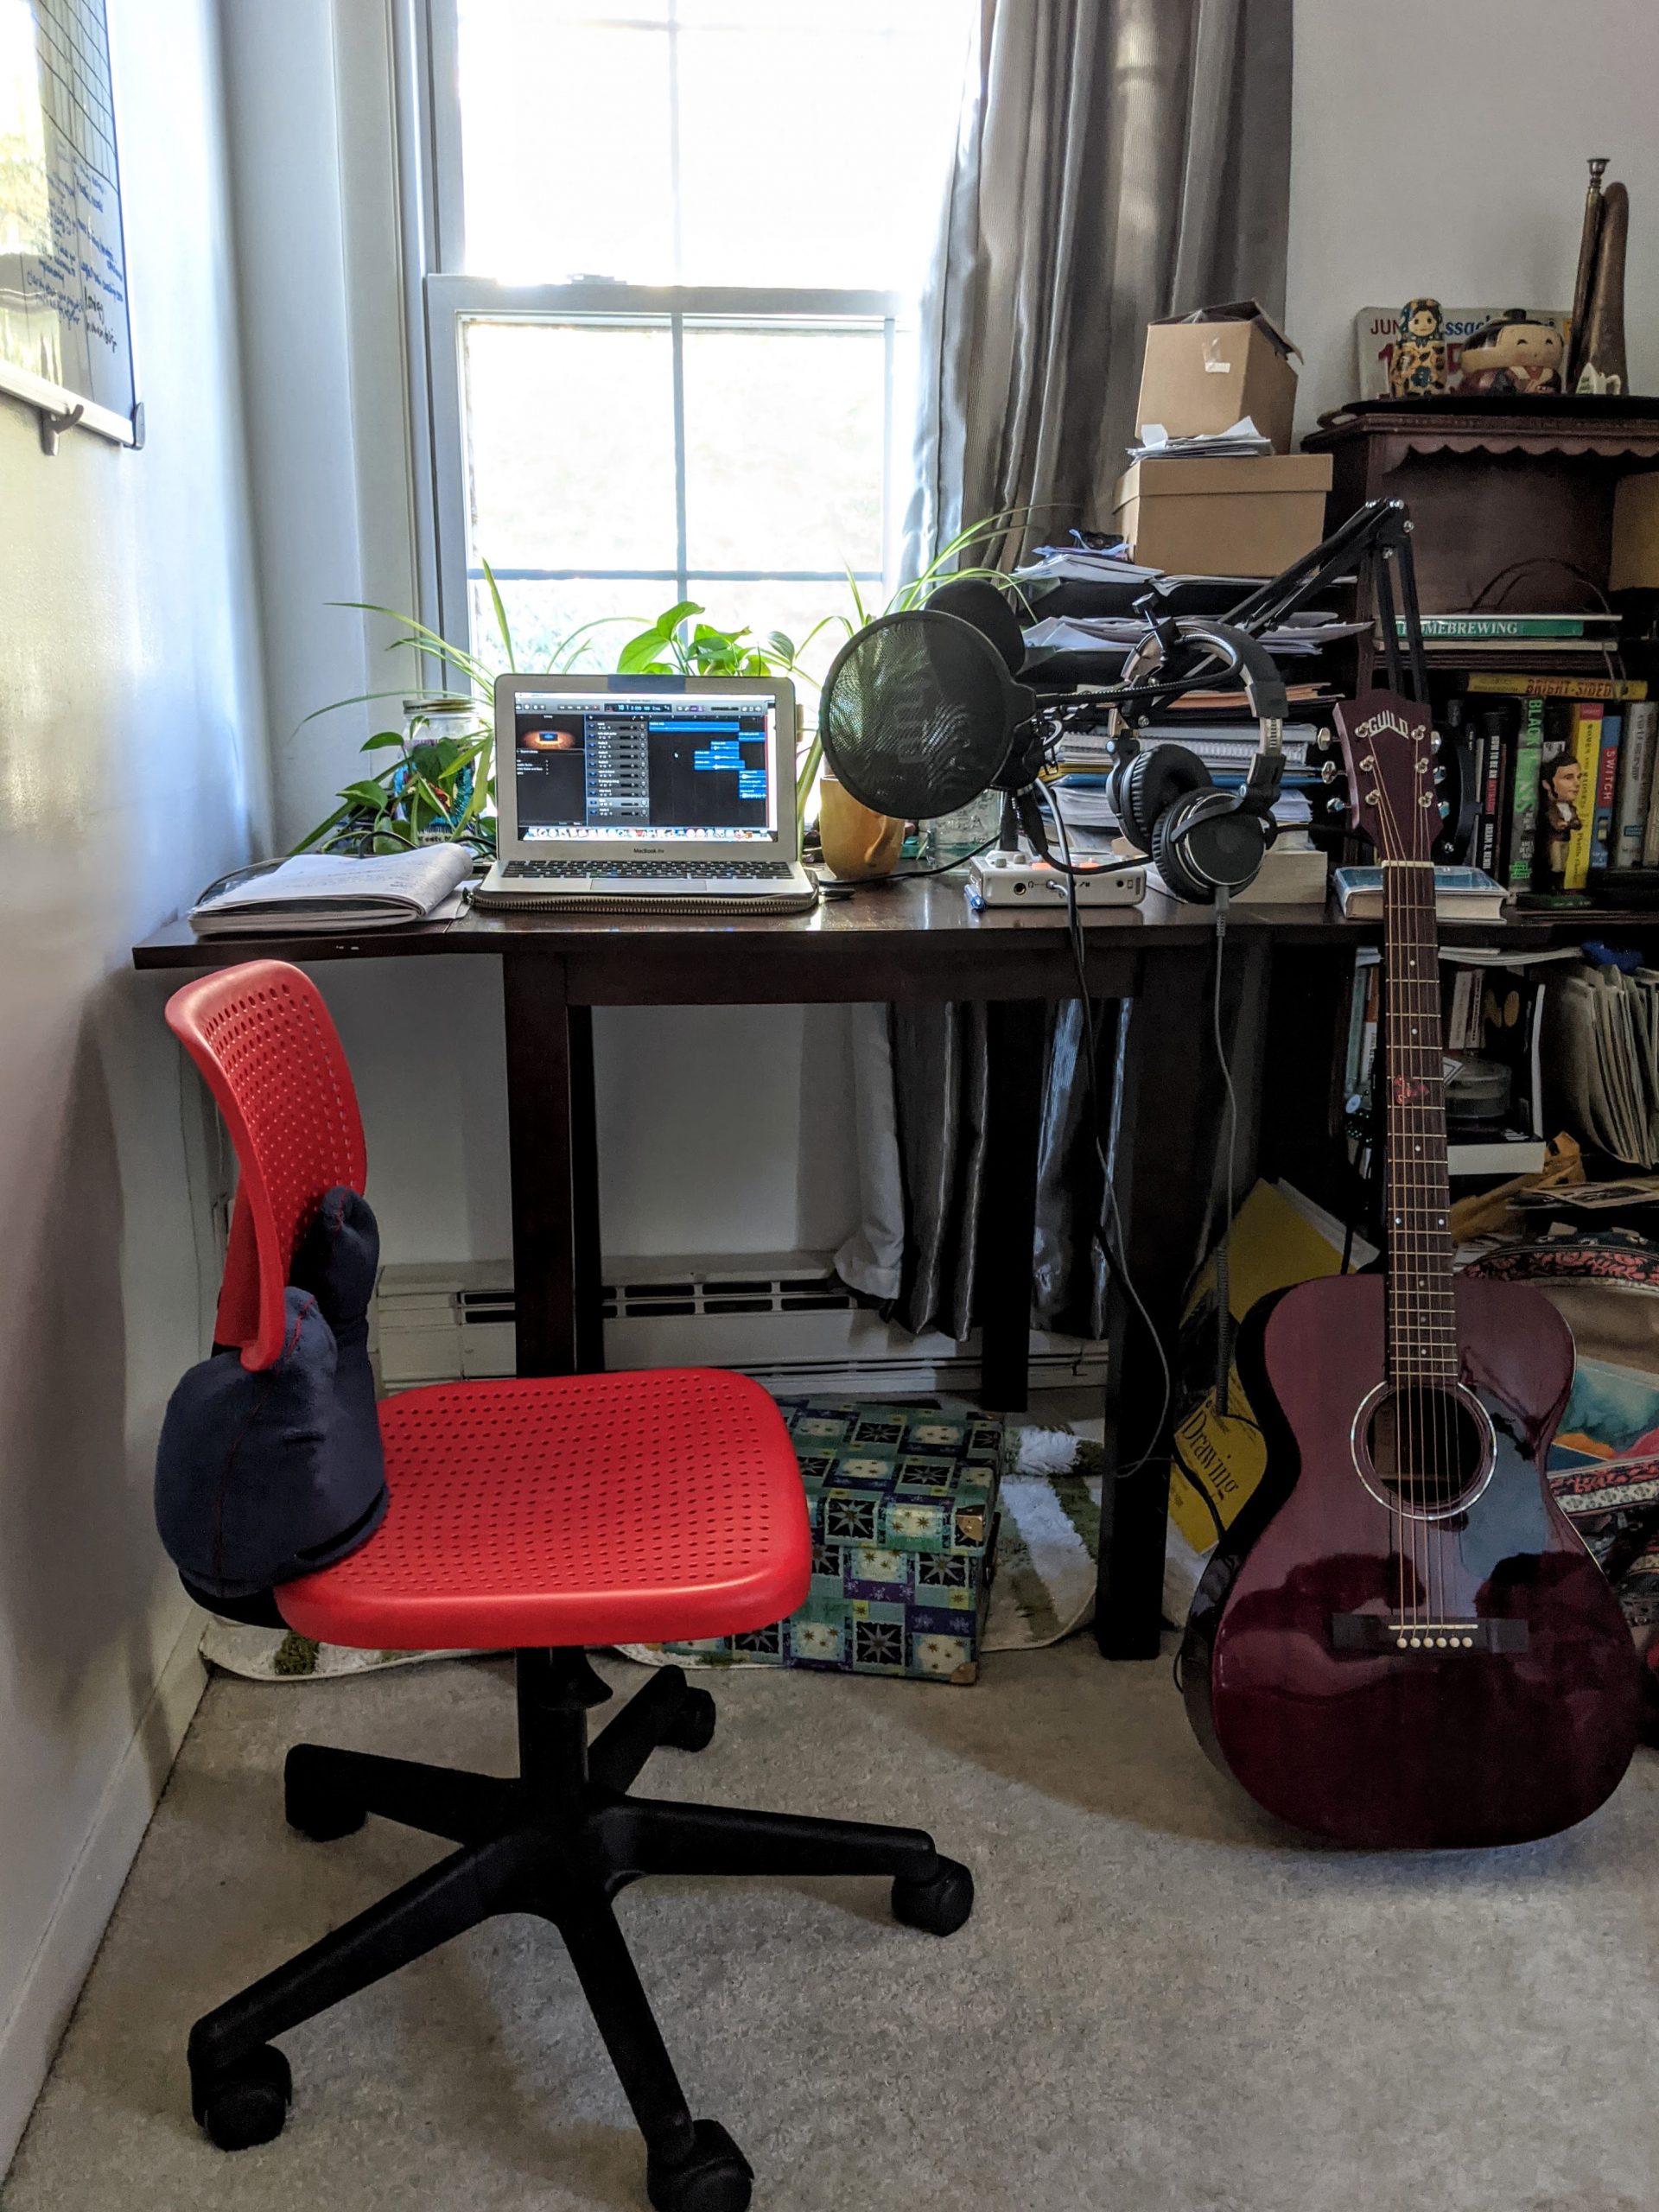 Brianna's office desk with a red chair, an acoustic guitar, and several plants